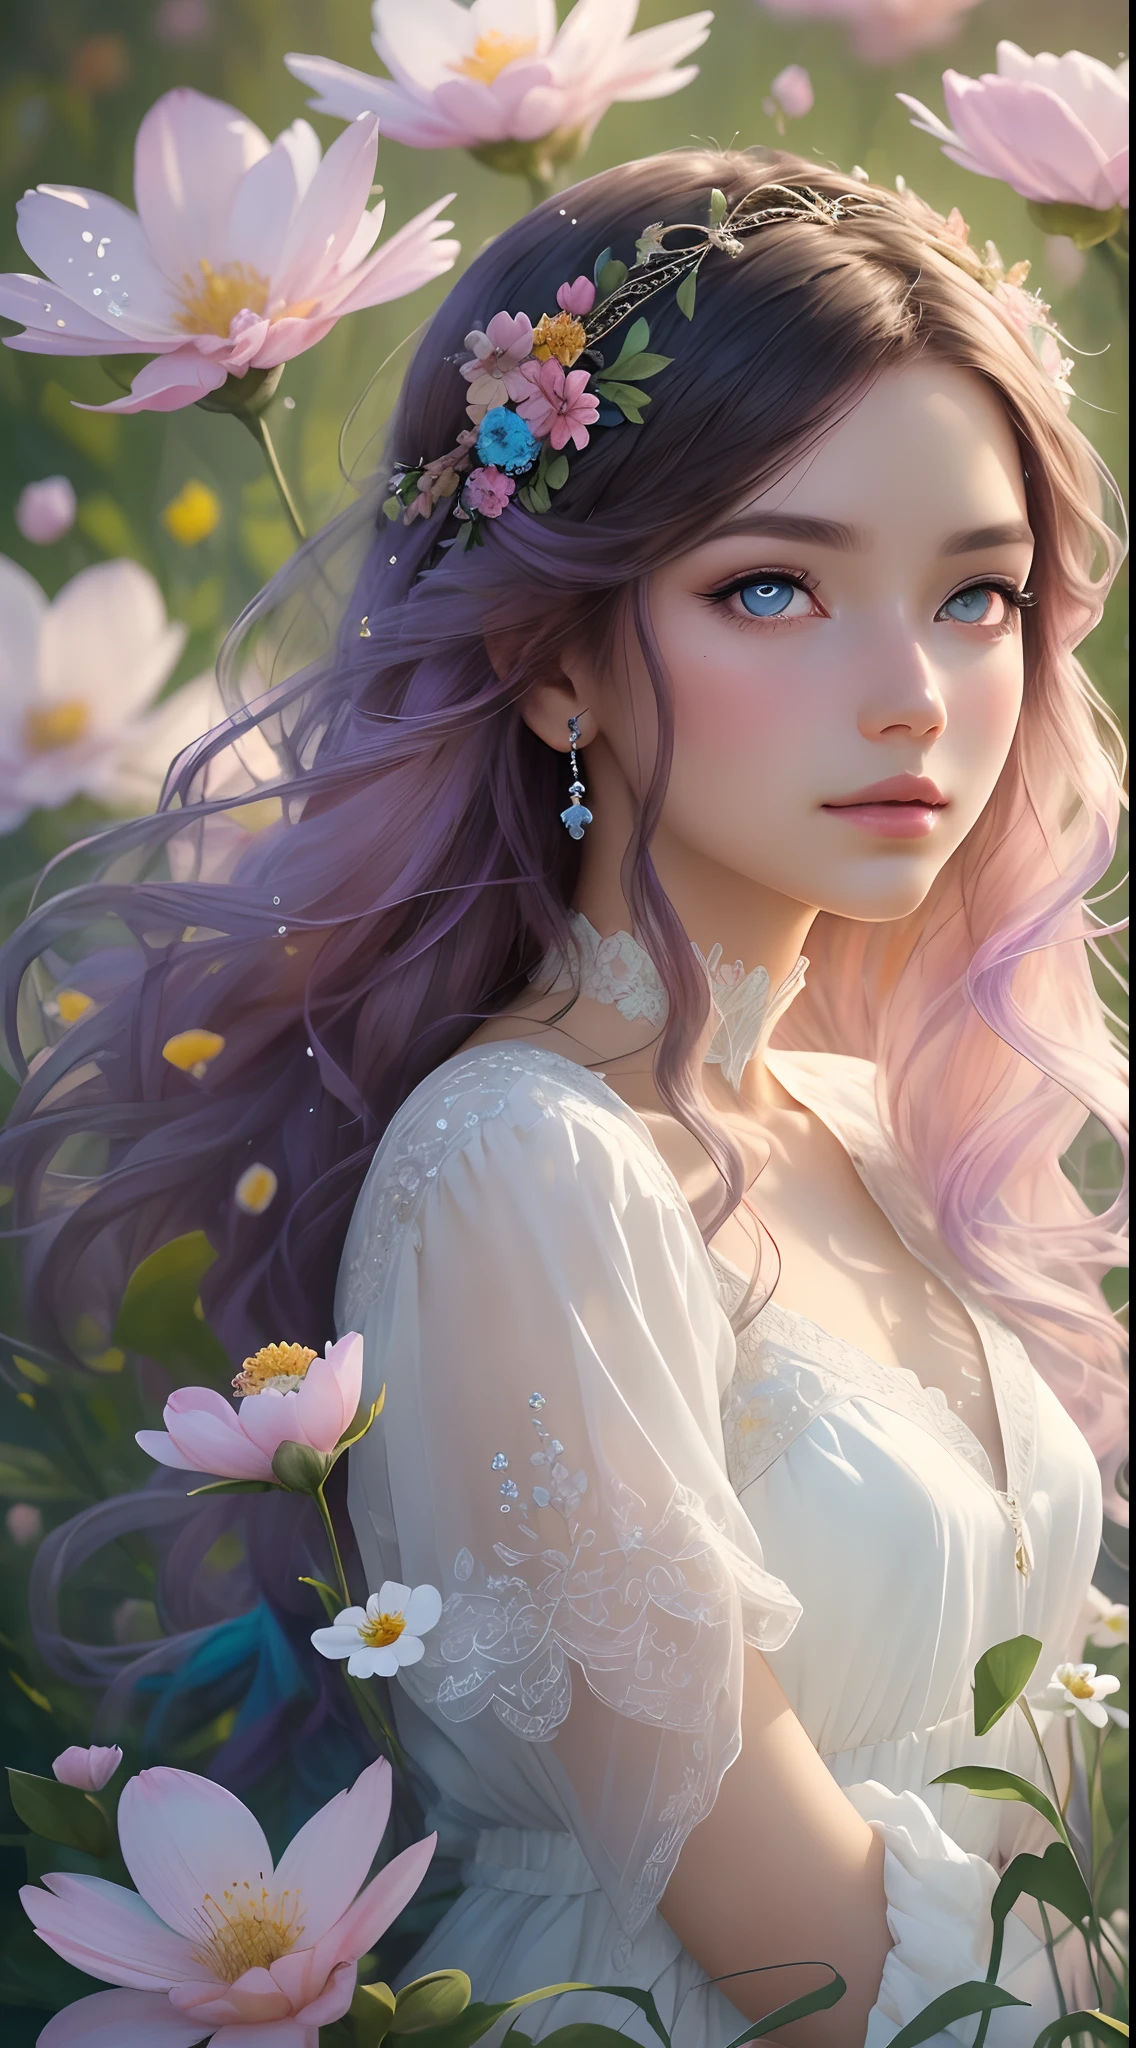 The colors in this image are soft and draw inspiration from gentle watercolors and should be primarily pink. Generate a delicate and tranquil flower princess with soft hair dancing in the wind and intricately braided. Her sweet face has puffy, kissable lips and stunning, highly realistic eyes. She has beautiful eyes, hires eyes, 8k eyes, beautiful detail eyes, beautiful detailed eyes, realistically shaded eyes, and realistic eyes in vibrant colors. She is wearing delicately detailed fabric of gossamer silk and satin. Small pink gemstones and cream pearls detail her clothing. She sits in the midst of the most beautiful meadow in the world and is surrounded by beautiful flowers of varying sizes and colors. The background is wild and unruly, with delicate flowers dancing in the wind and creating a dynamic and compelling image. An ornately flowered headdress adorns her head and soft petals fall around her. The flowers are realistic and very detailed and come in different shapes and sizes, some with iridescence and others with varying shades of pink and blue. Include a soft watercolor sky. The background is wild, with delicate flowers dancing in the wind and colorful pollen filling the air. Include realistic hair and skin texture. Include fantasy details, enhanced details, iridescence, colorful glittering wind, and pollen. Pay special attention to her face and make sure it is beautifully and realistically detailed. The image should be dreamy and ethereal. Include intricate fantasy details. 8k, intricate, elegant, highly detailed, majestic, digital photography, art by artgerm and ruan jia and greg rutkowski surreal painting pearl butterfly filigree, flower petals, (masterpiece, finely detailed beautiful eyes: 1.2), hdr, realistic skin texture, ((ornate)), ((intricate)), ((fantasy00d:1.2)), rays of light, (add details), (add more details), highly detailed, ornate flowers, dew drops, sunlight, rays of sun